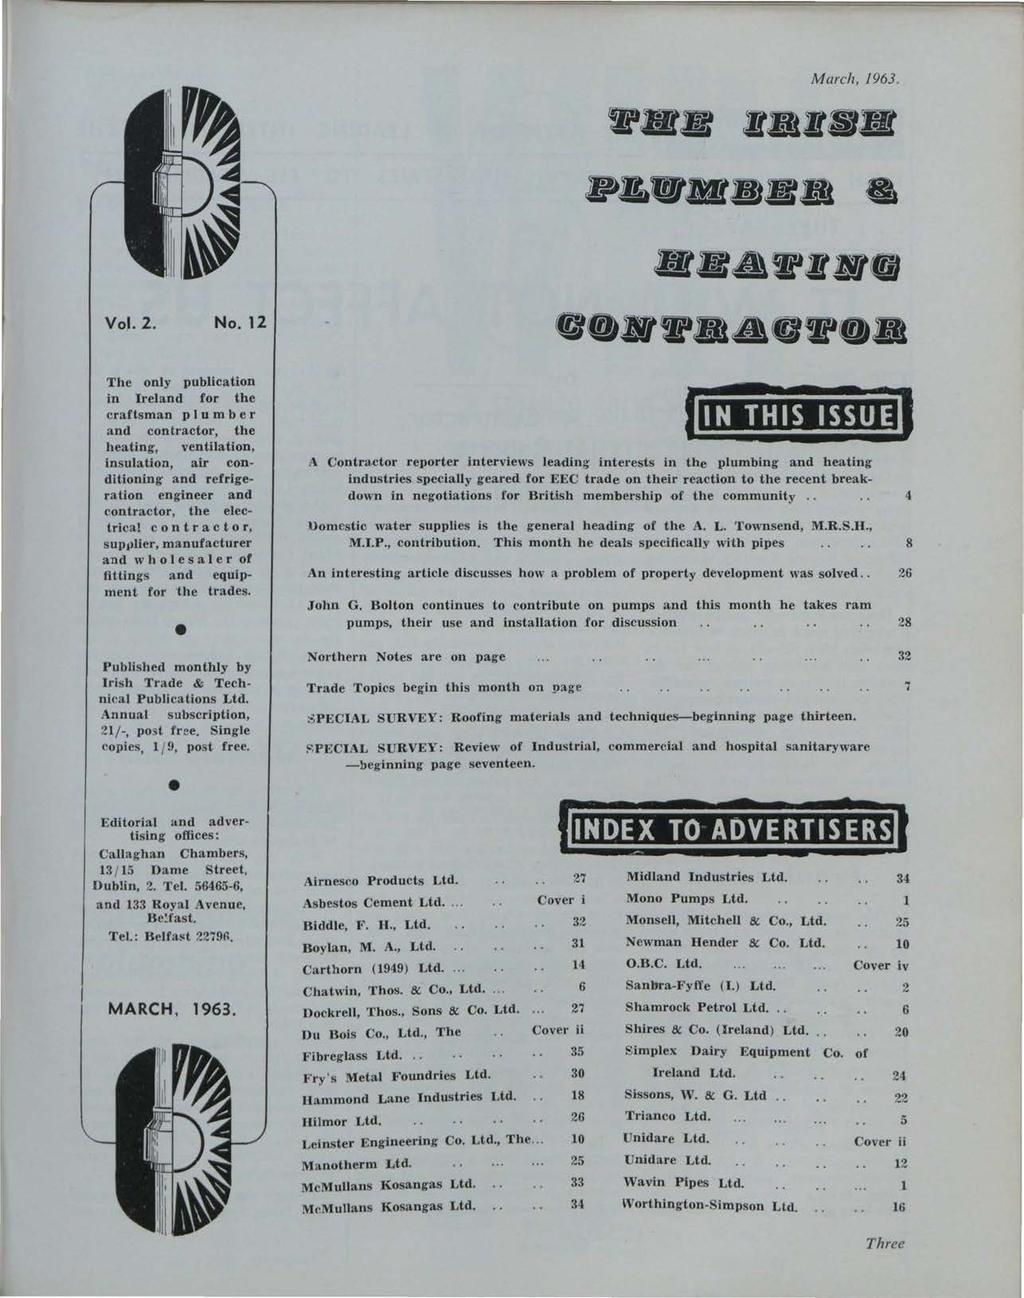 et al.: The Irish Plumber and Heating Contractor, March 1963 (complete is March, 1963. Vol. 2. No.